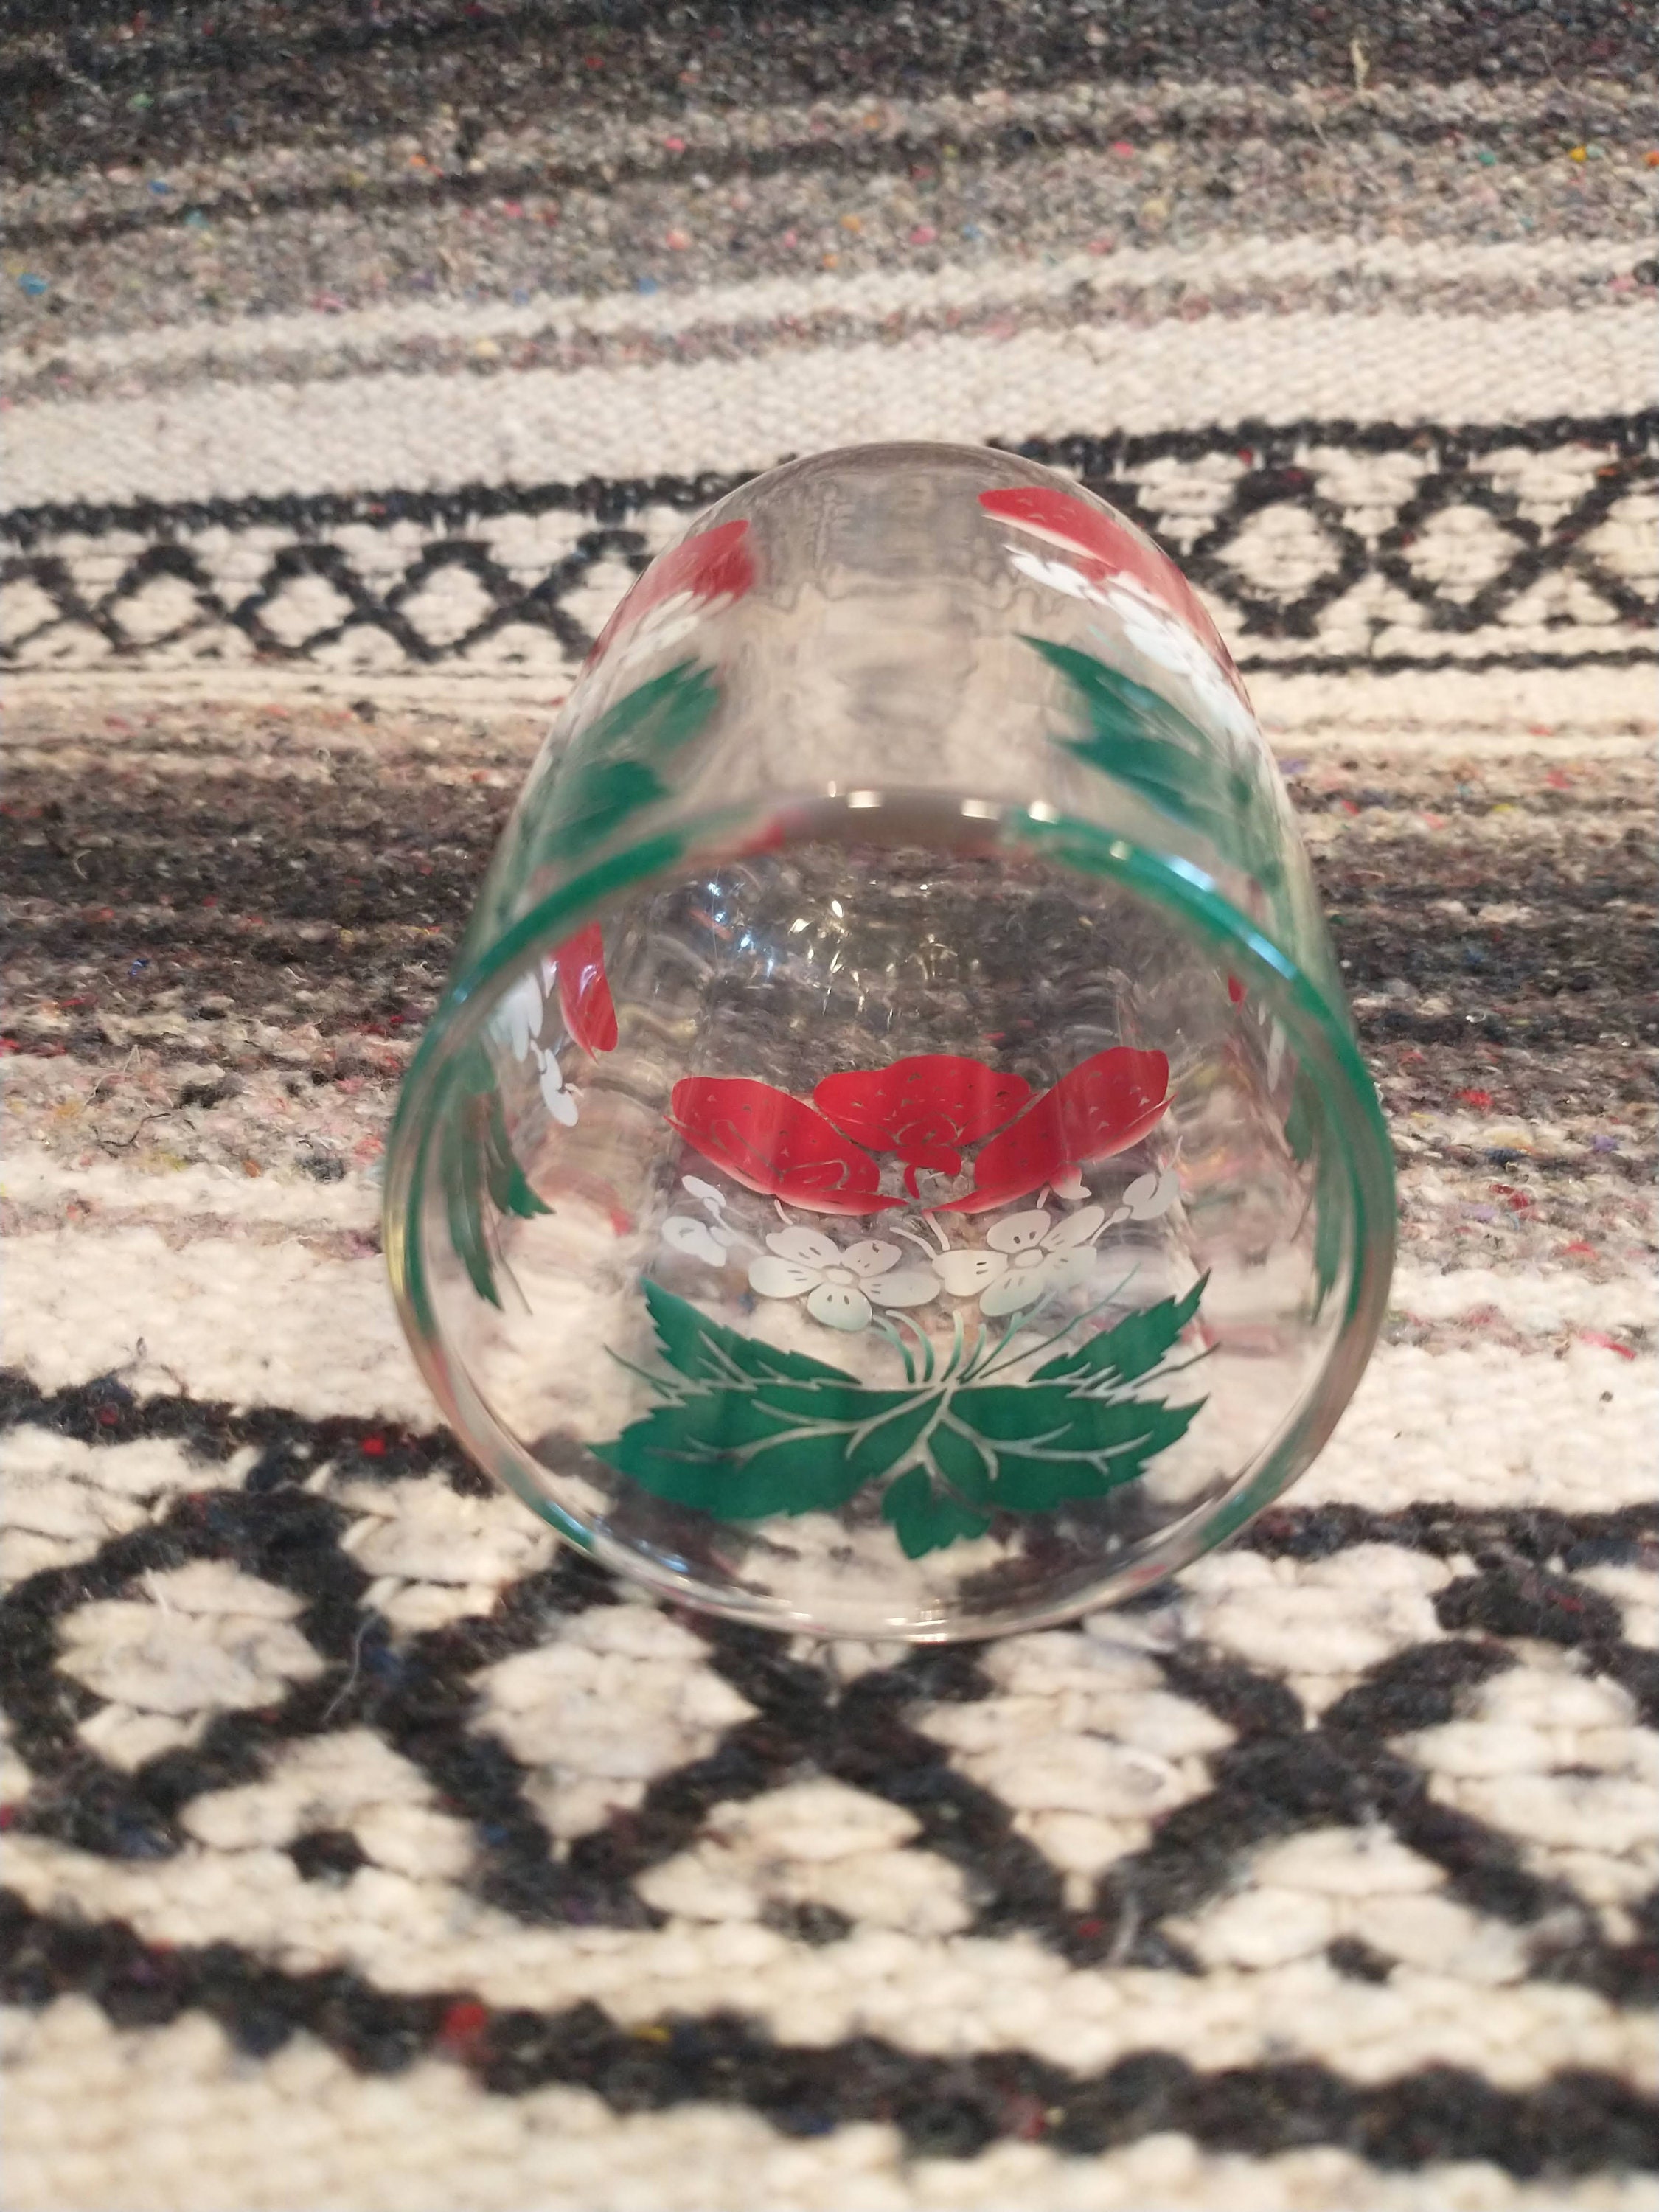 Strawberry Glass Tumbler – Forest Cove Home